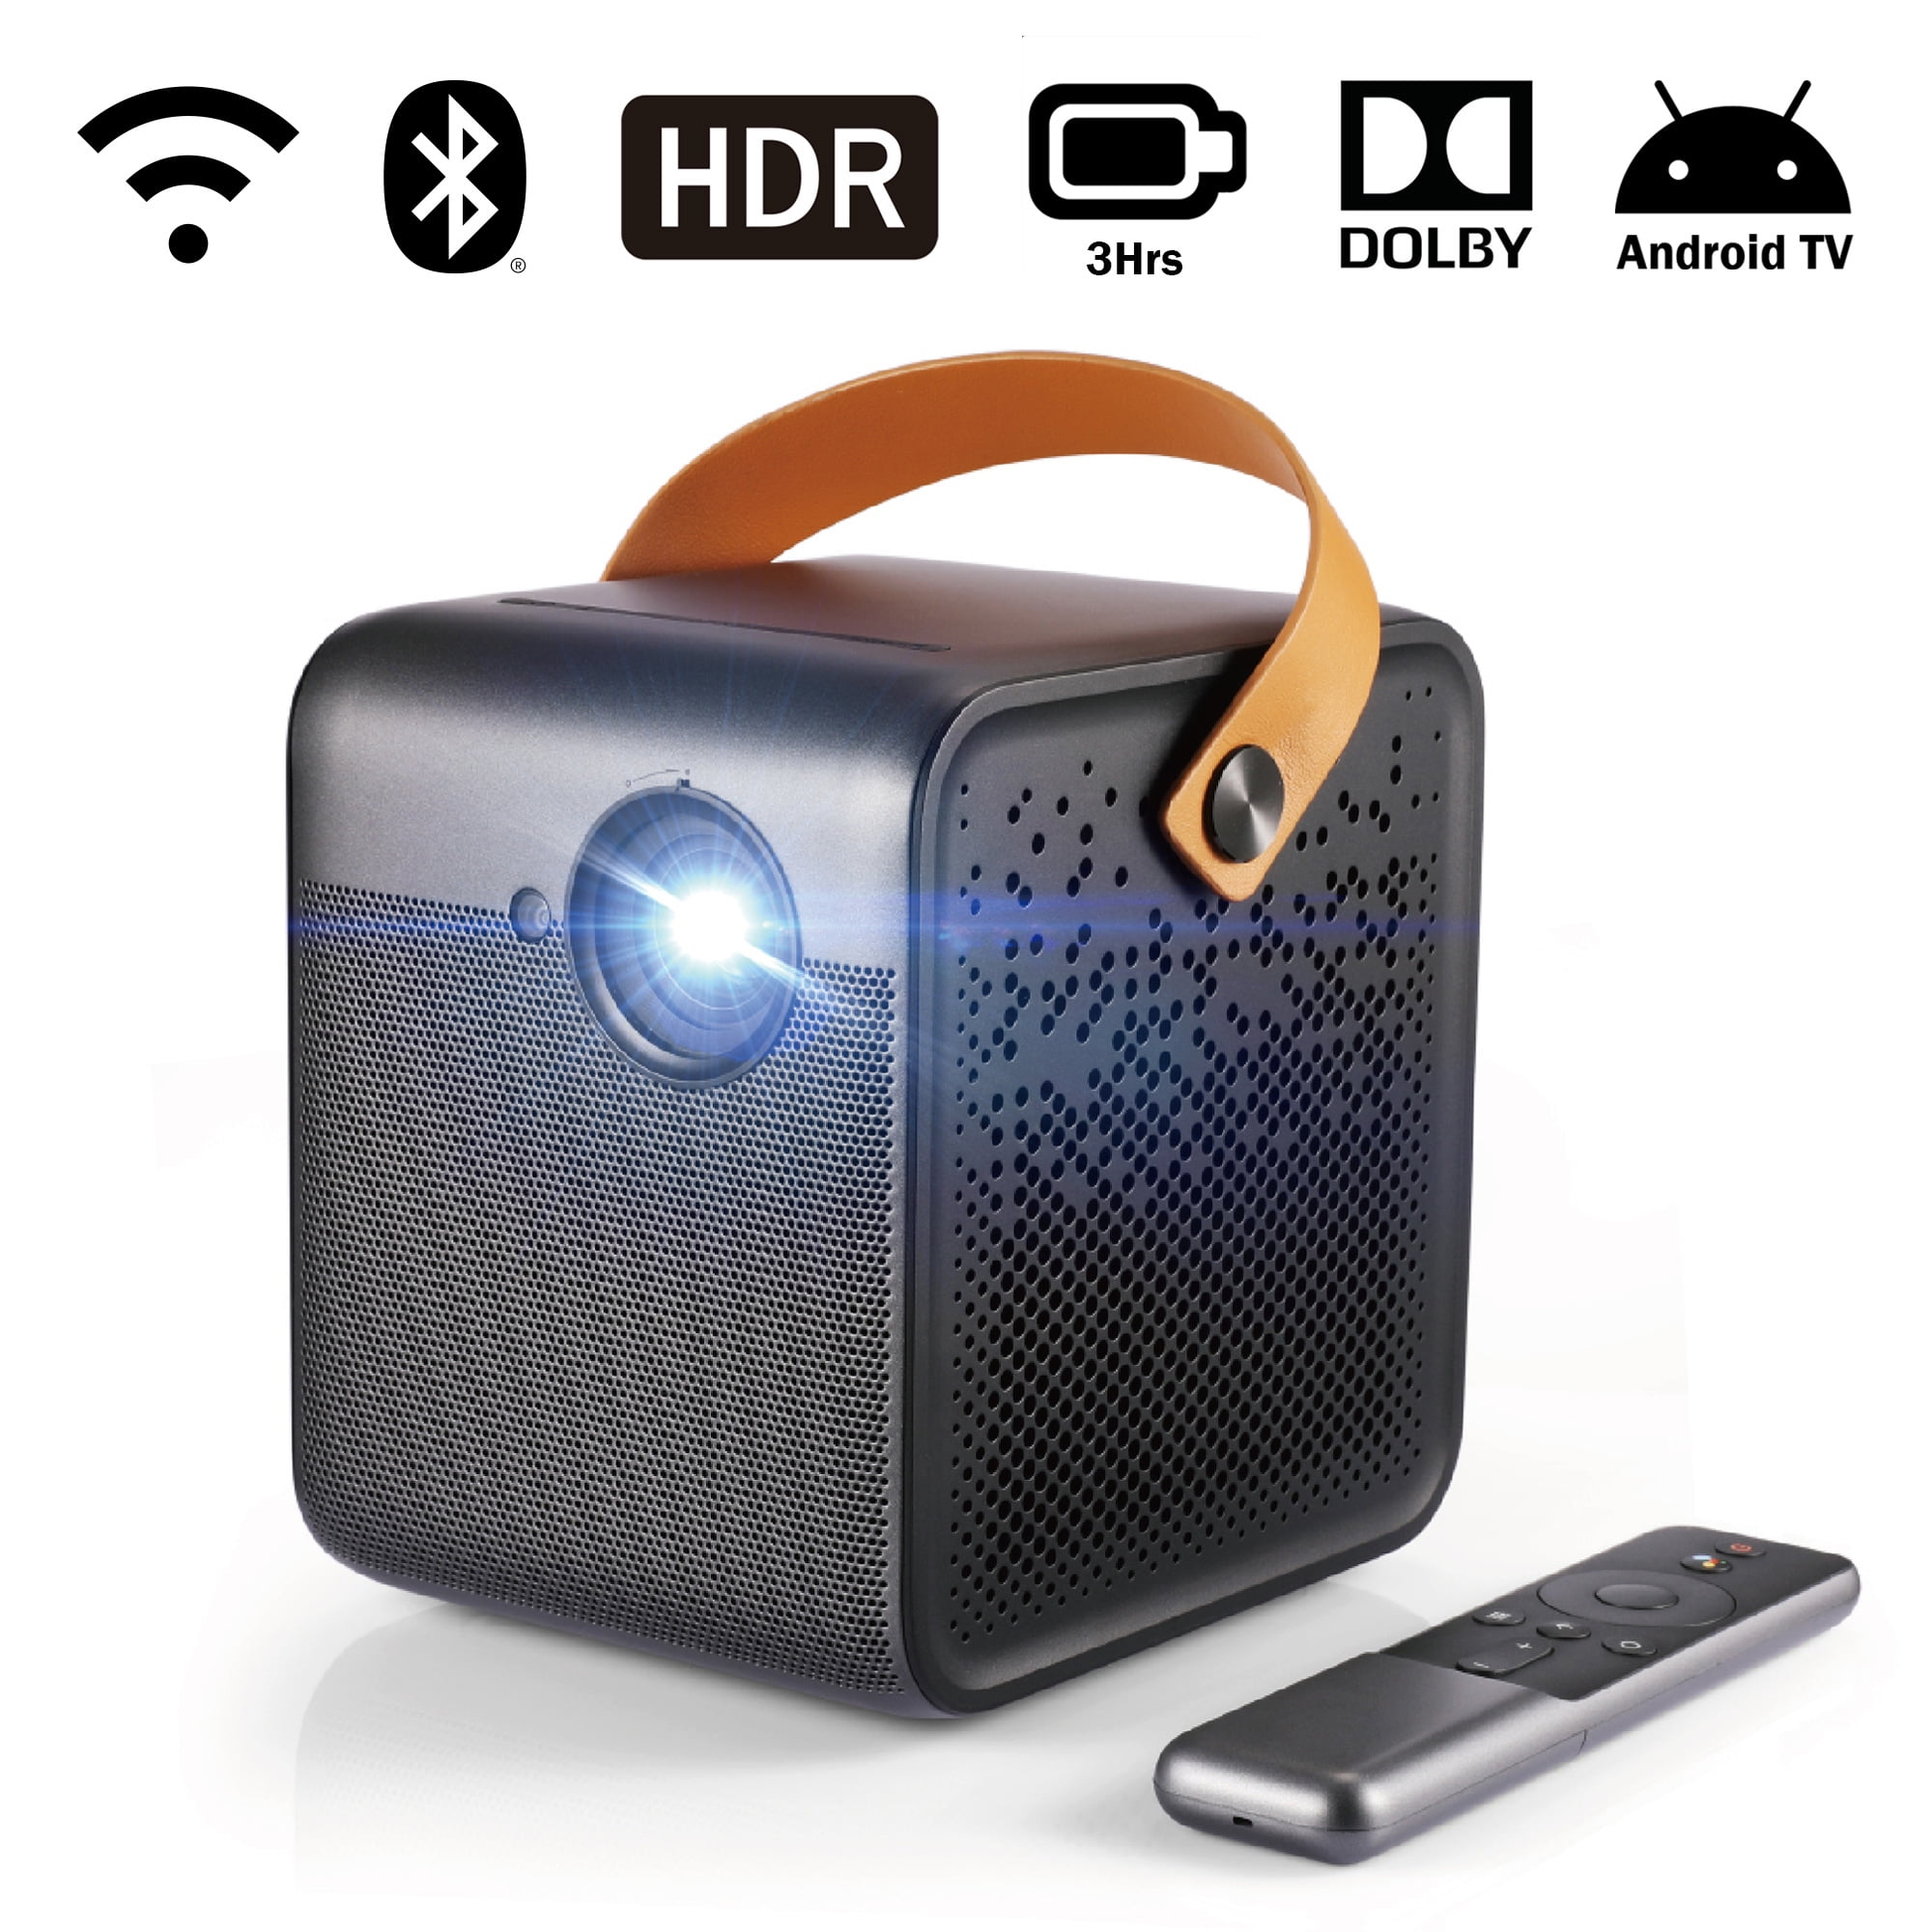 This pocket-sized portable smart projector is 28% off today